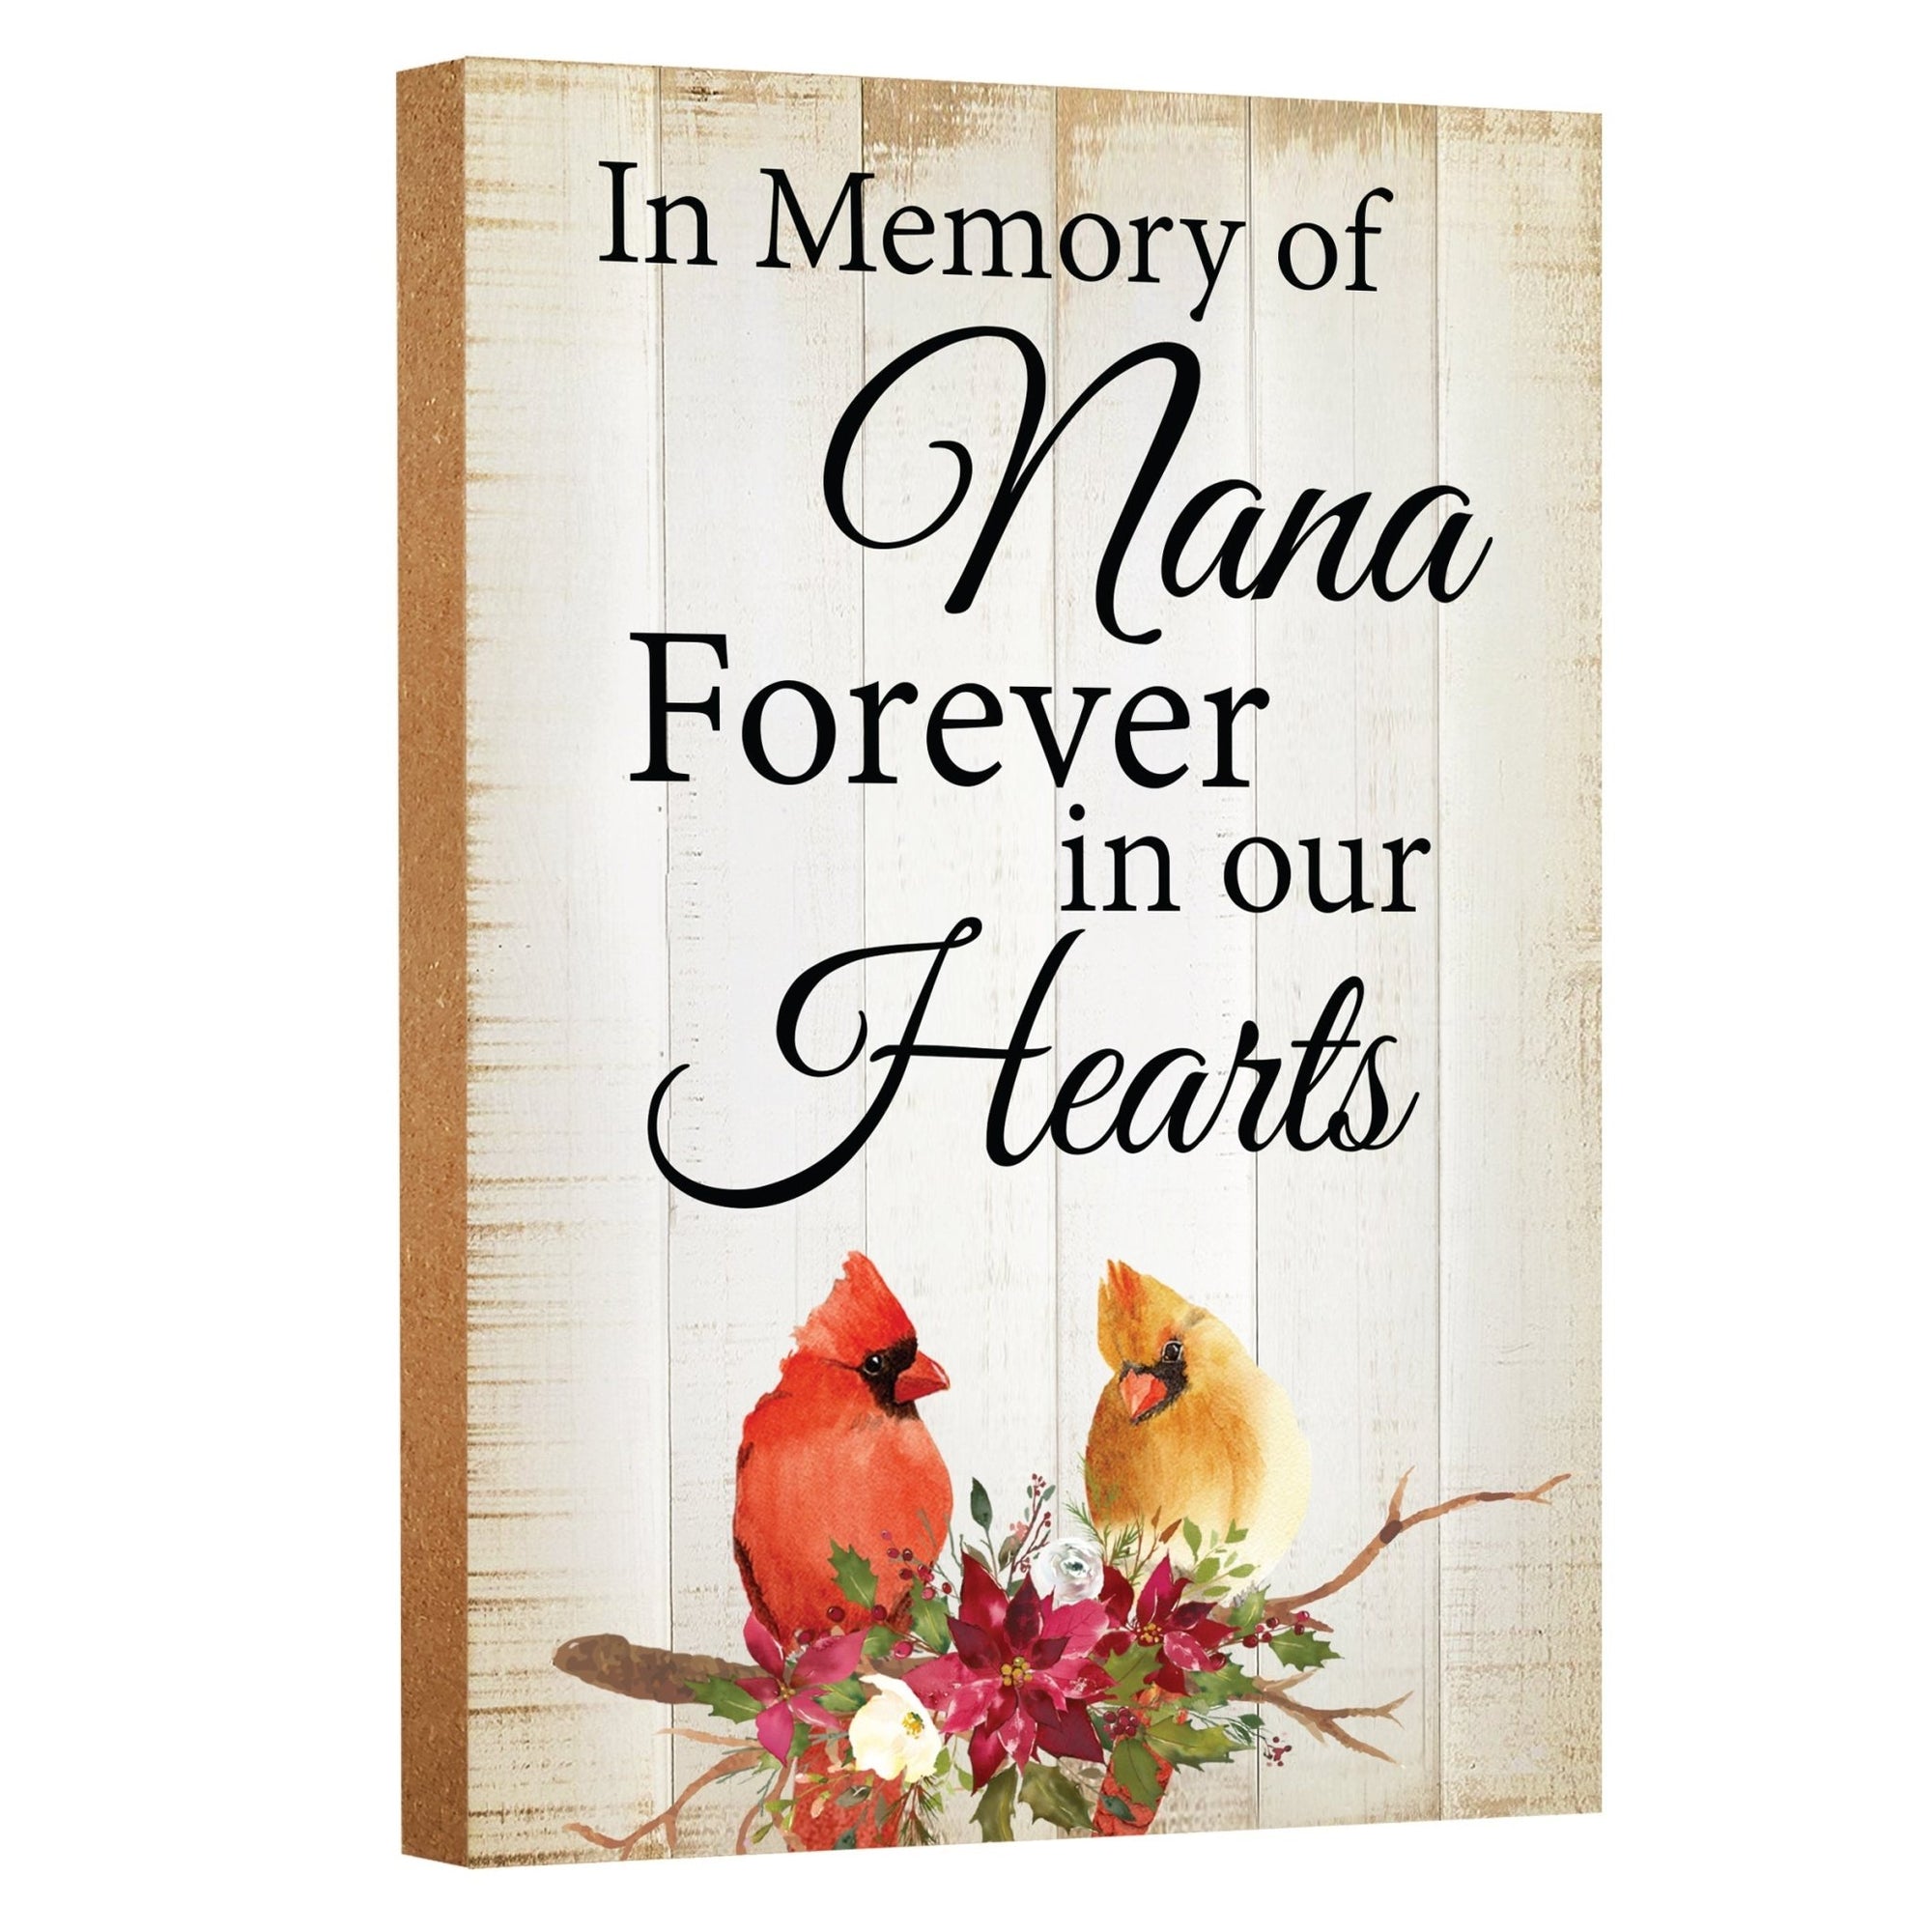 Thoughtful memorial gifts for the loss of a loved one.